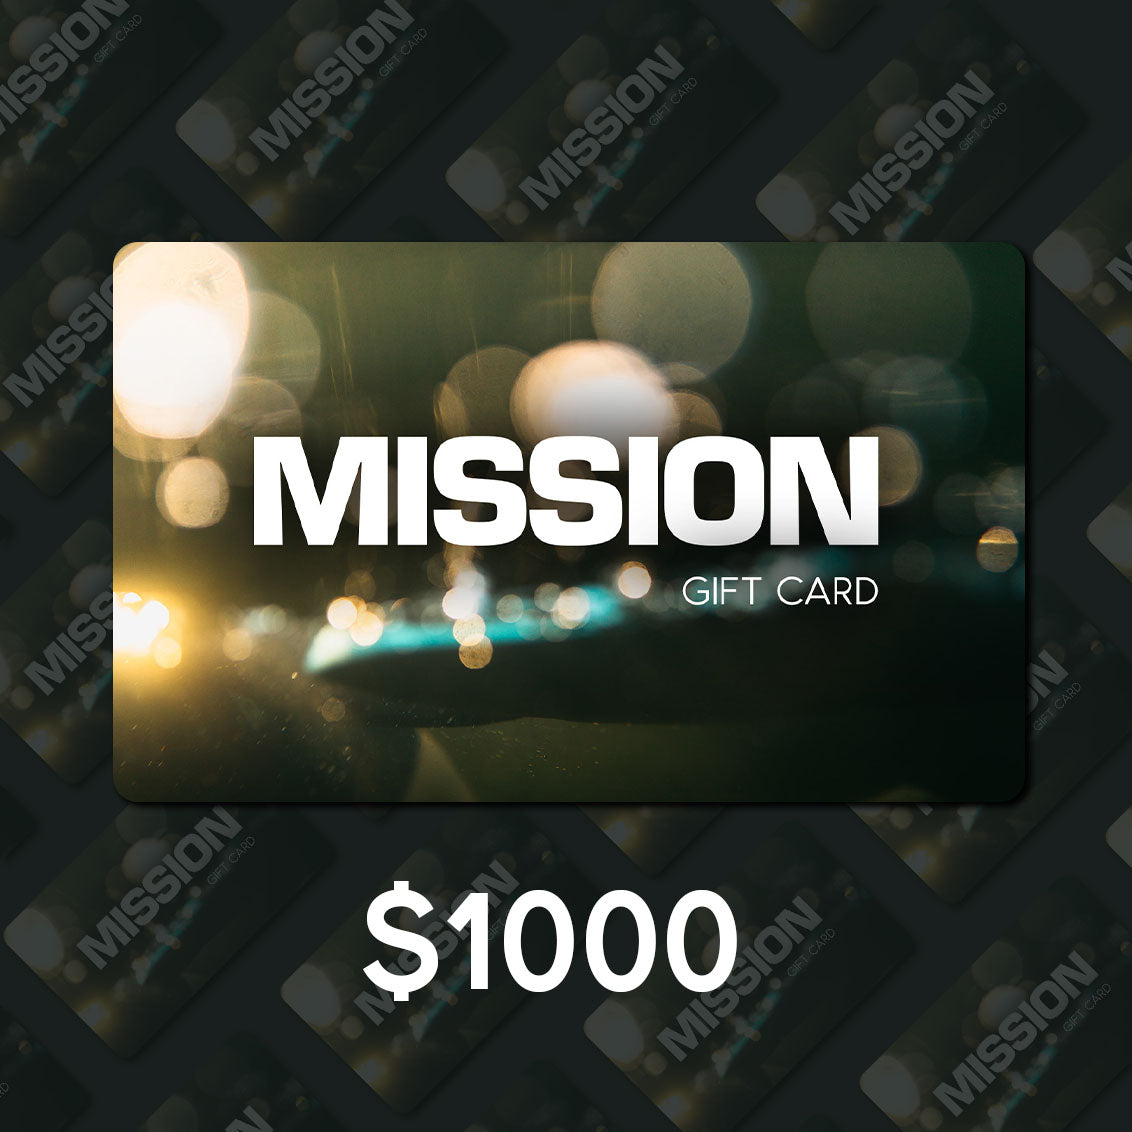 MISSION | GIFT CARD